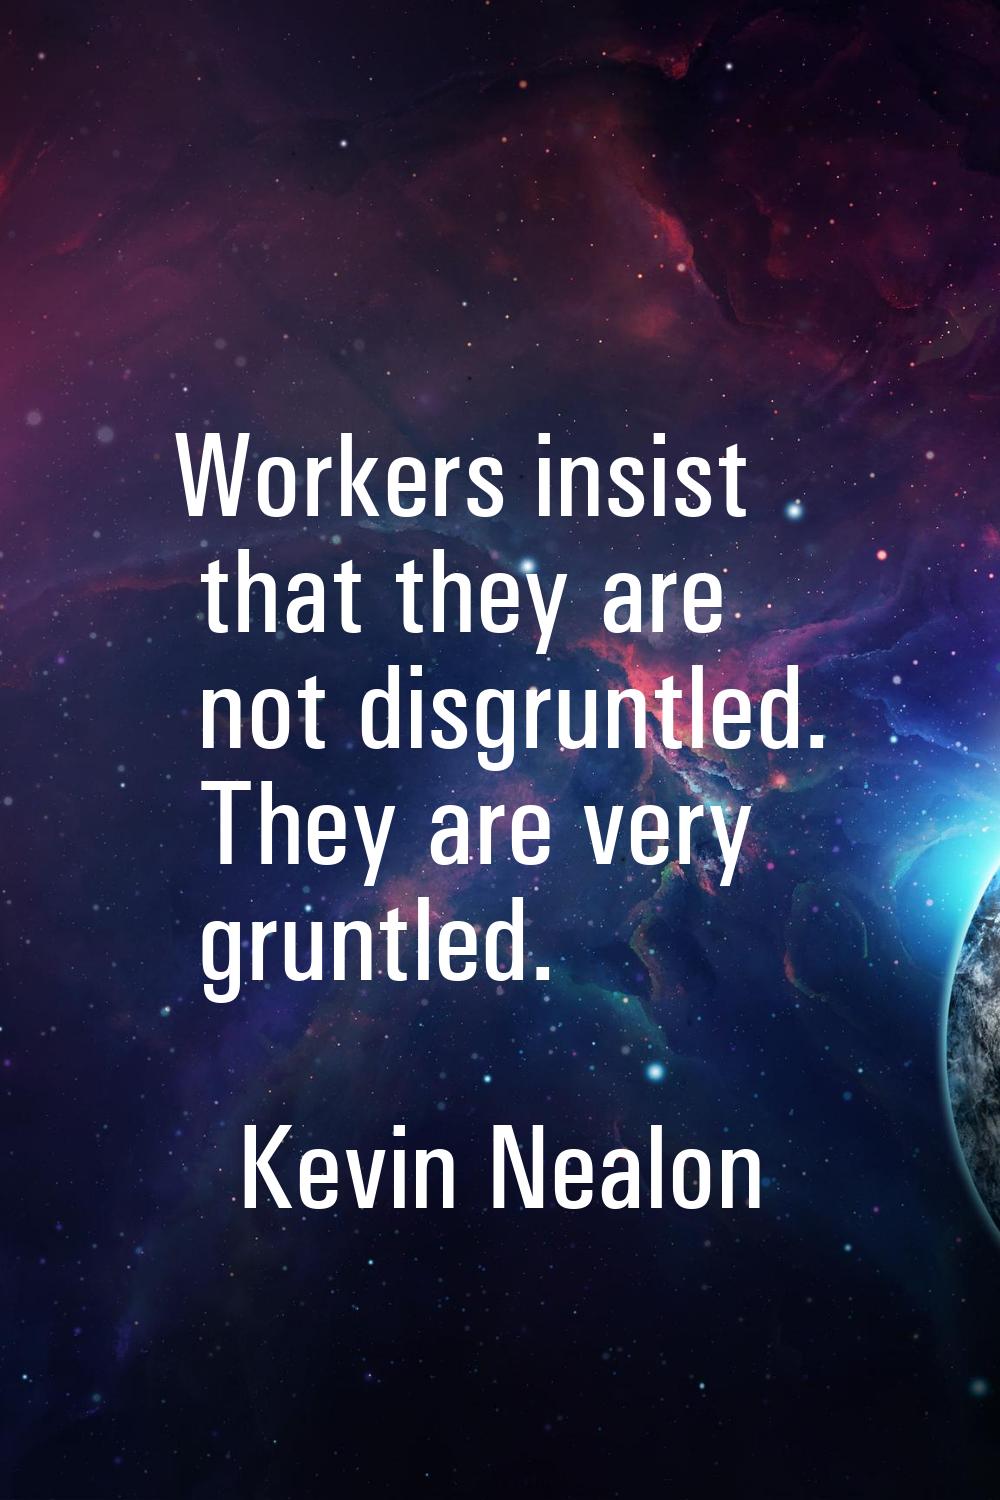 Workers insist that they are not disgruntled. They are very gruntled.